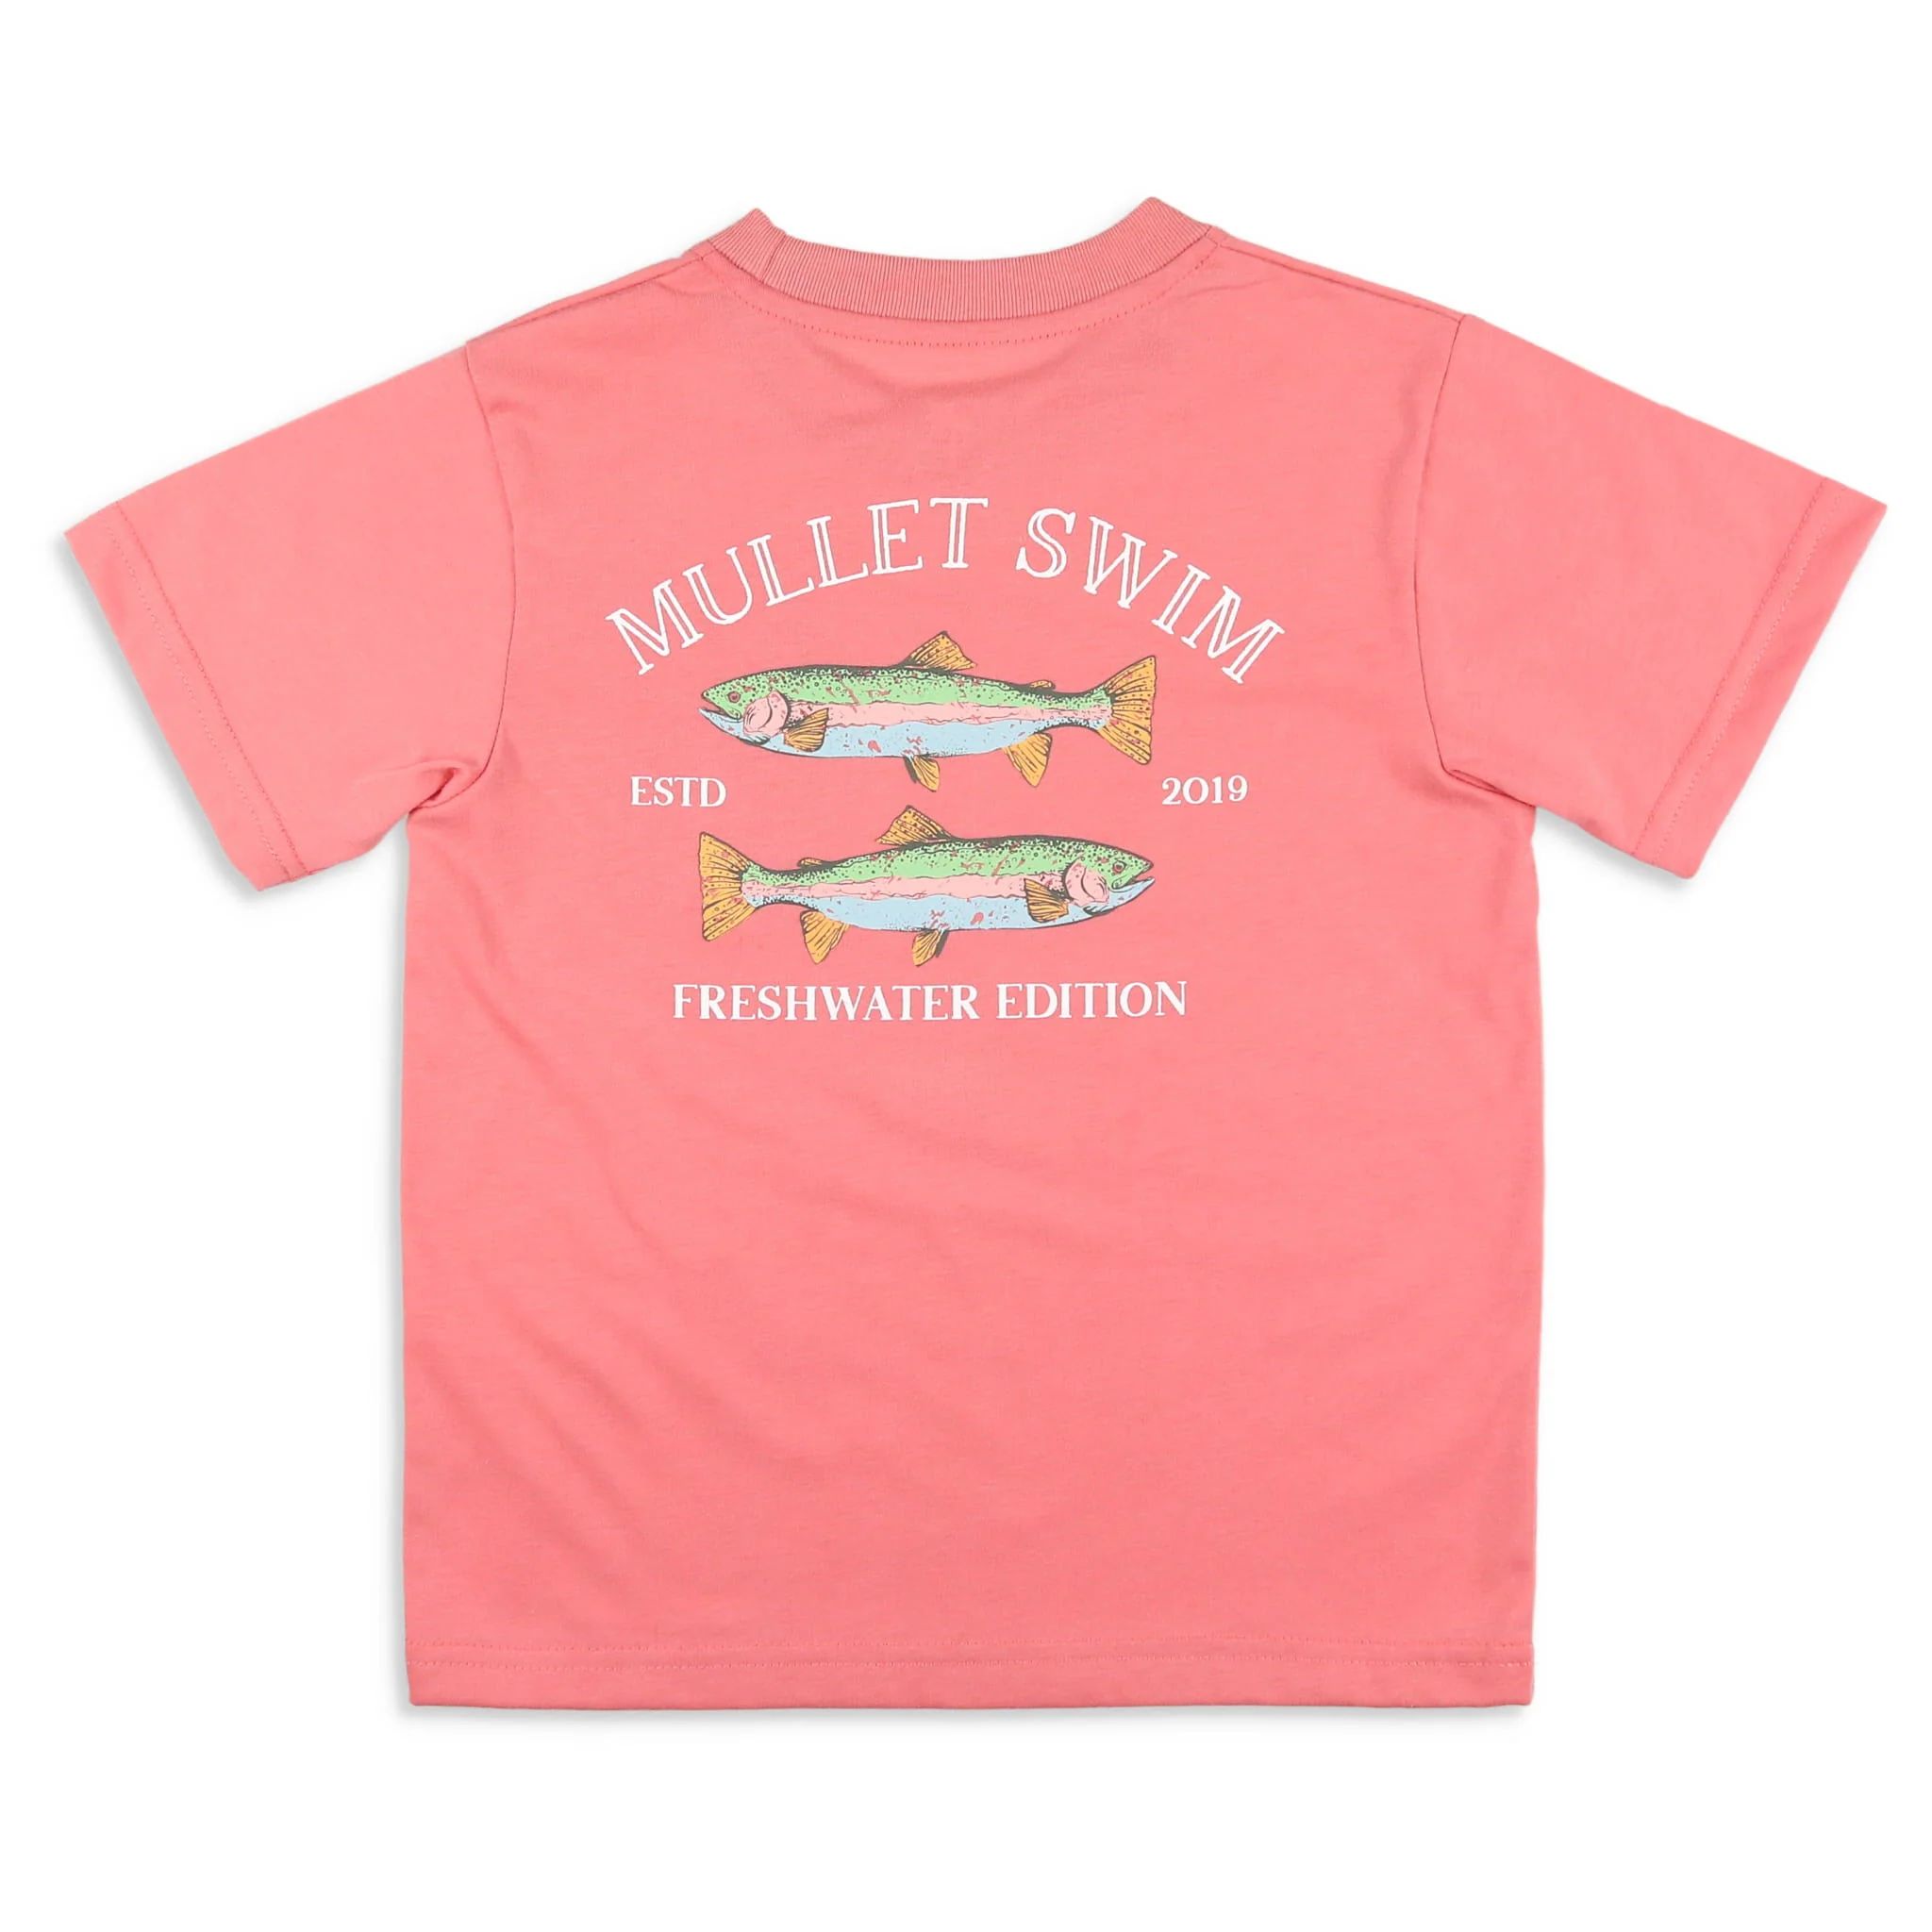 Boys Freshwater Fish Graphic Tee - Shrimp and Grits Kids | Shrimp and Grits Kids